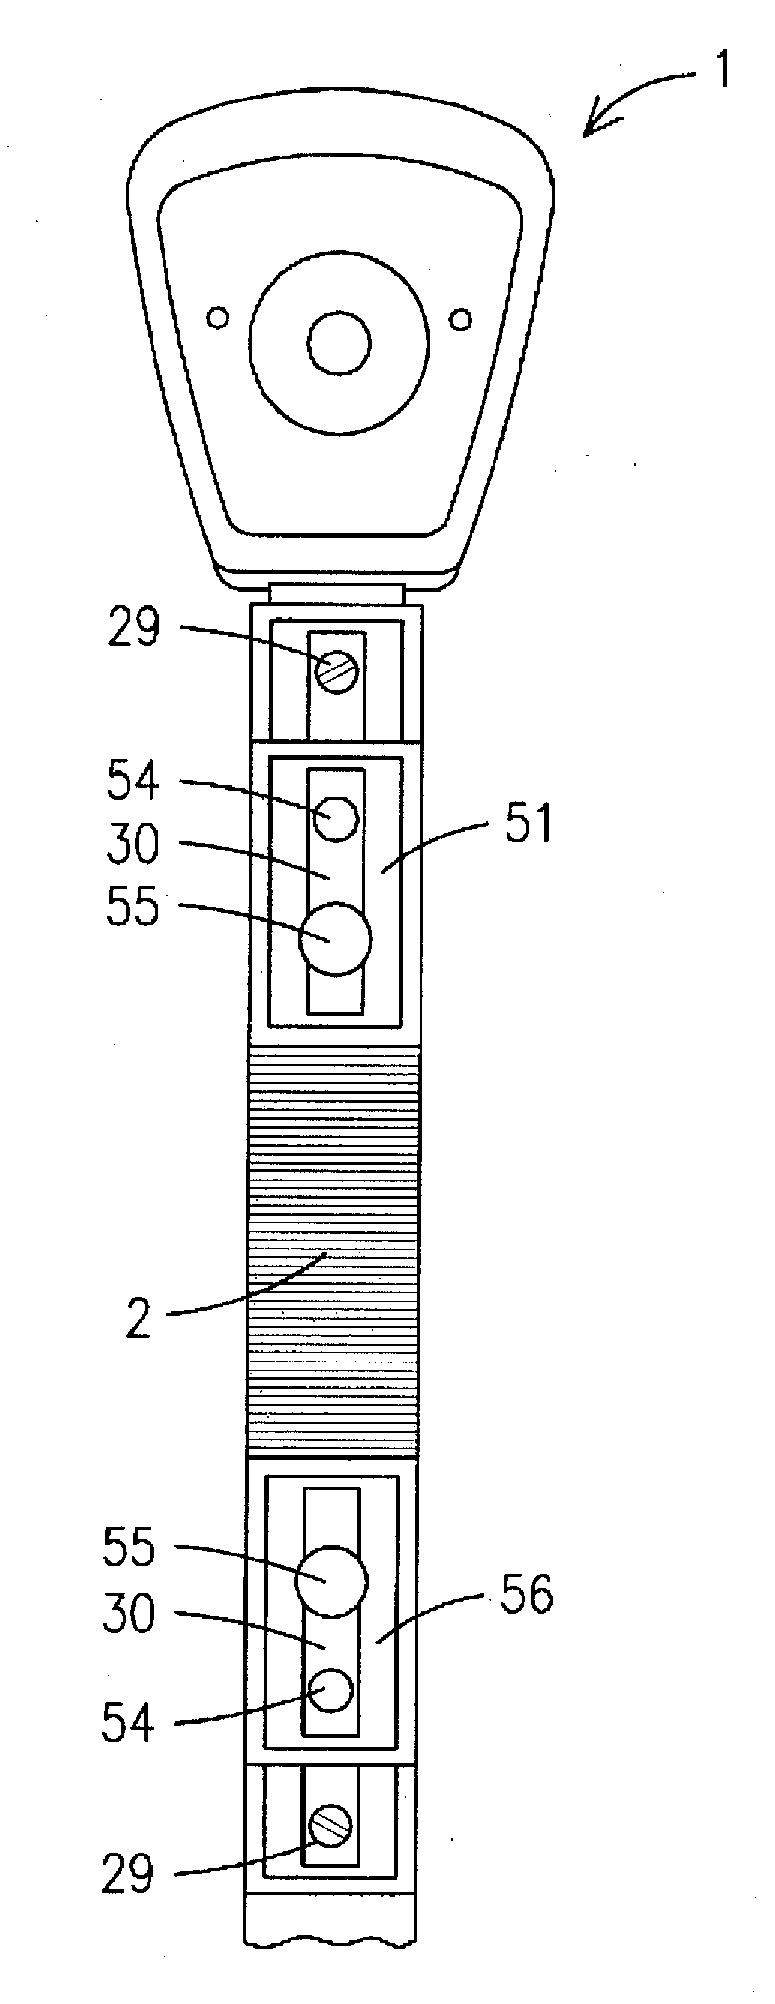 Device and method for calibrating retinoscopes